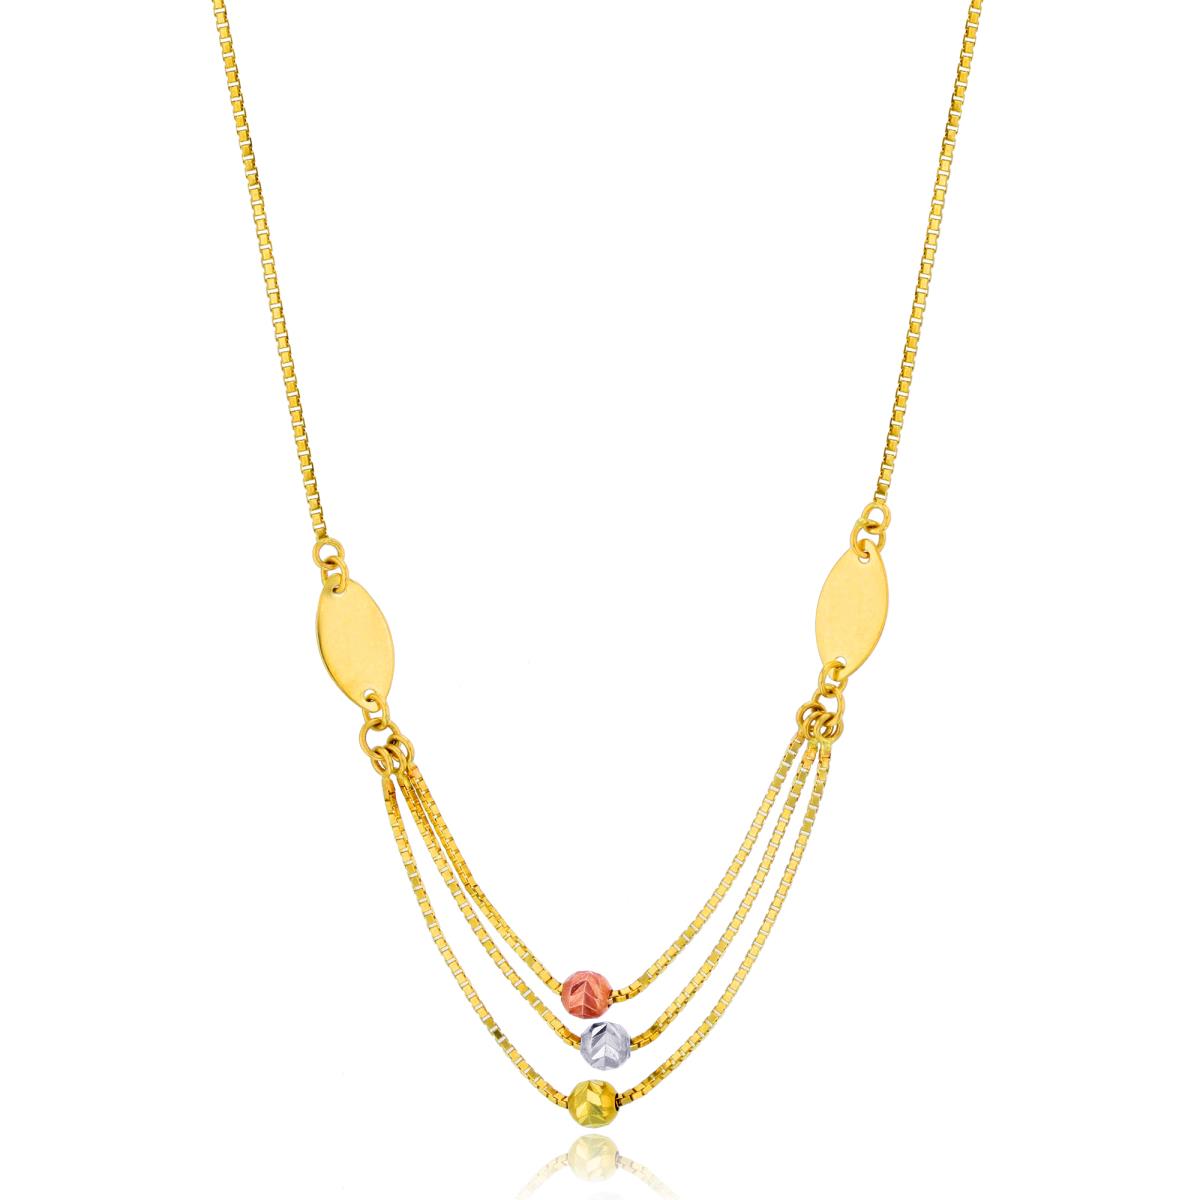 14K Tri-color Gold 3 Row Ball 17" Necklace